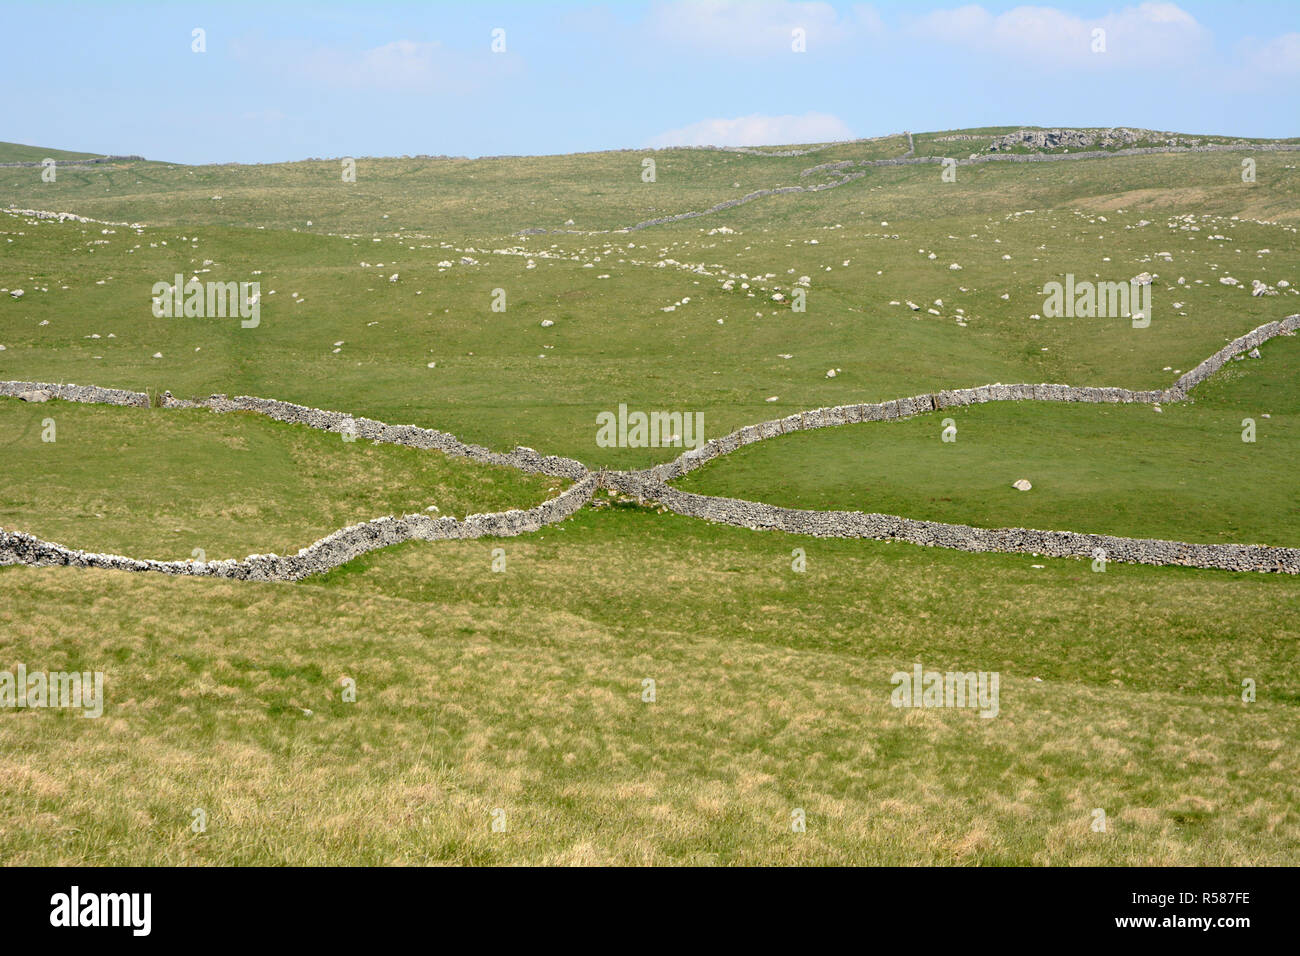 Intersecting dry stone walls running across the moors along the Dales Way hiking trail, in Yorkshire, northern England, United Kingdom. Stock Photo